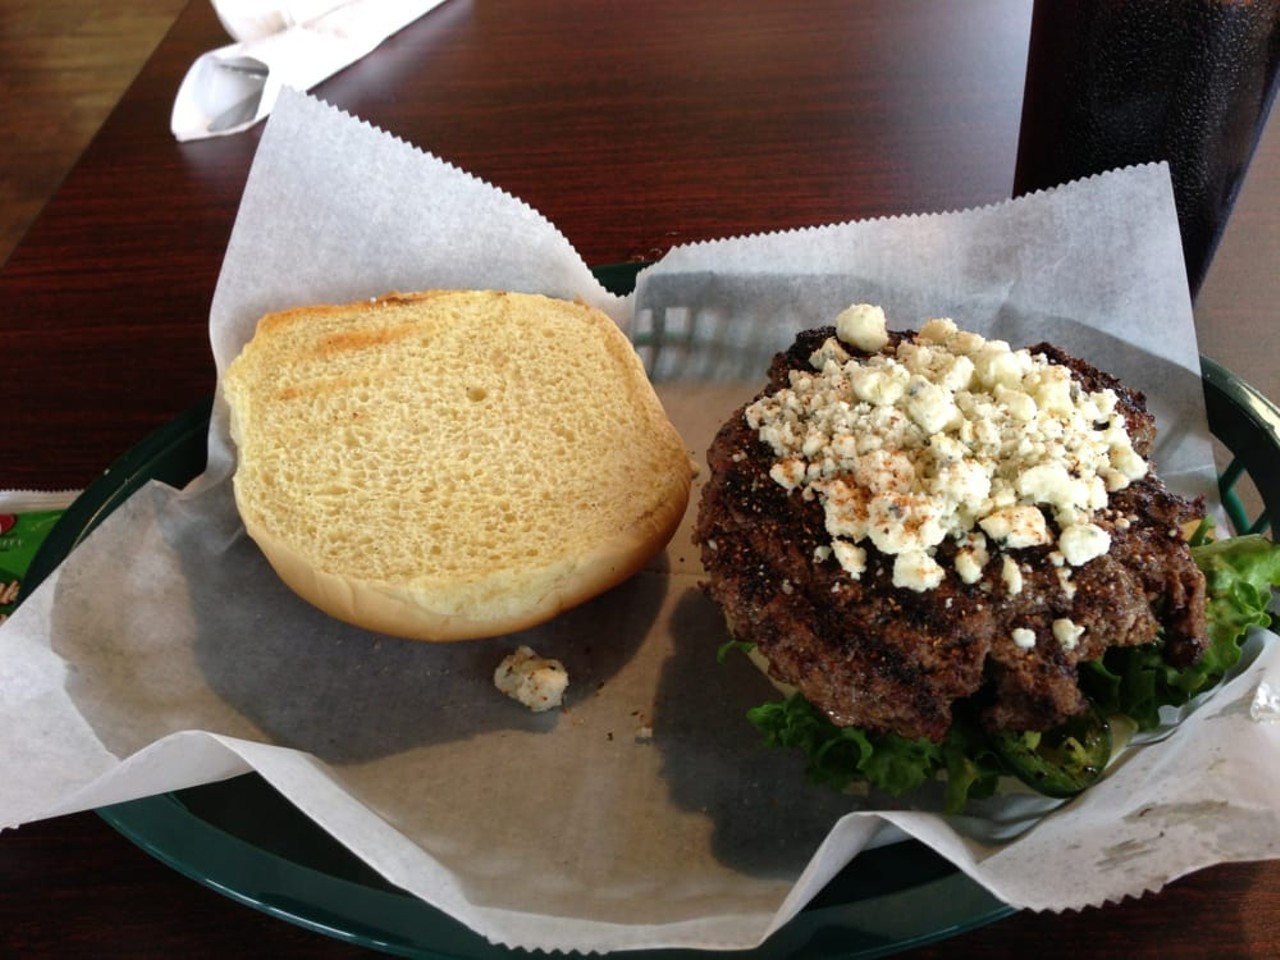 #26: Breakfast and Burgers
(10024 Gravois Road; 314-669-9555)
Read the reviews here.
Photo credit: Jason P. via Yelp